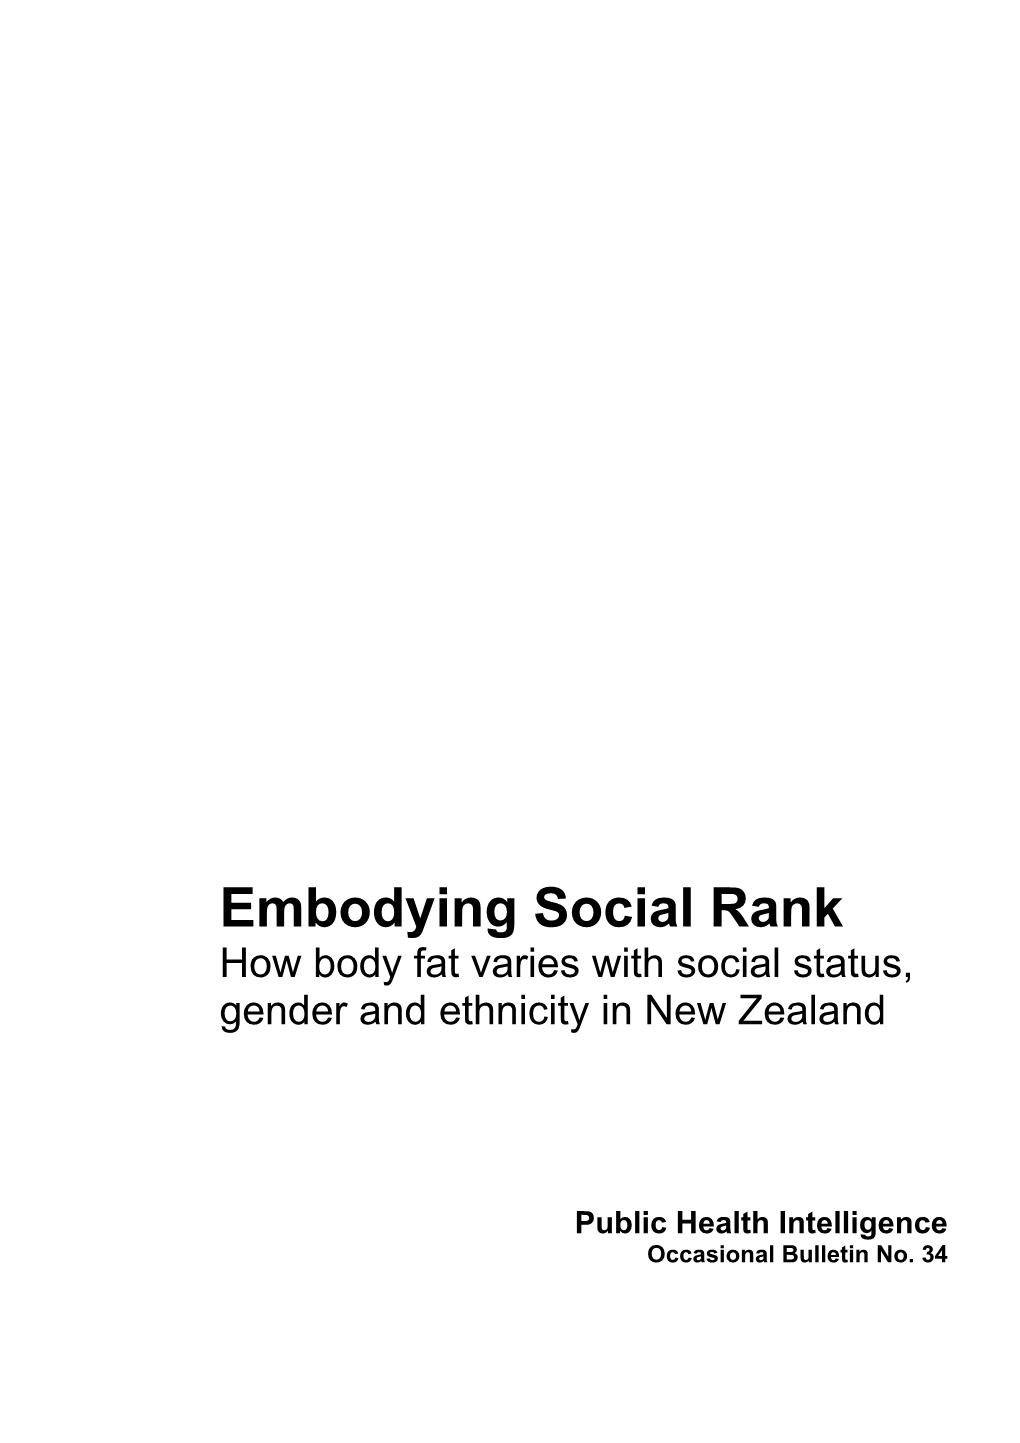 Embodying Social Rank: How Body Fat Varies with Social Status, Gender and Ethnicity In